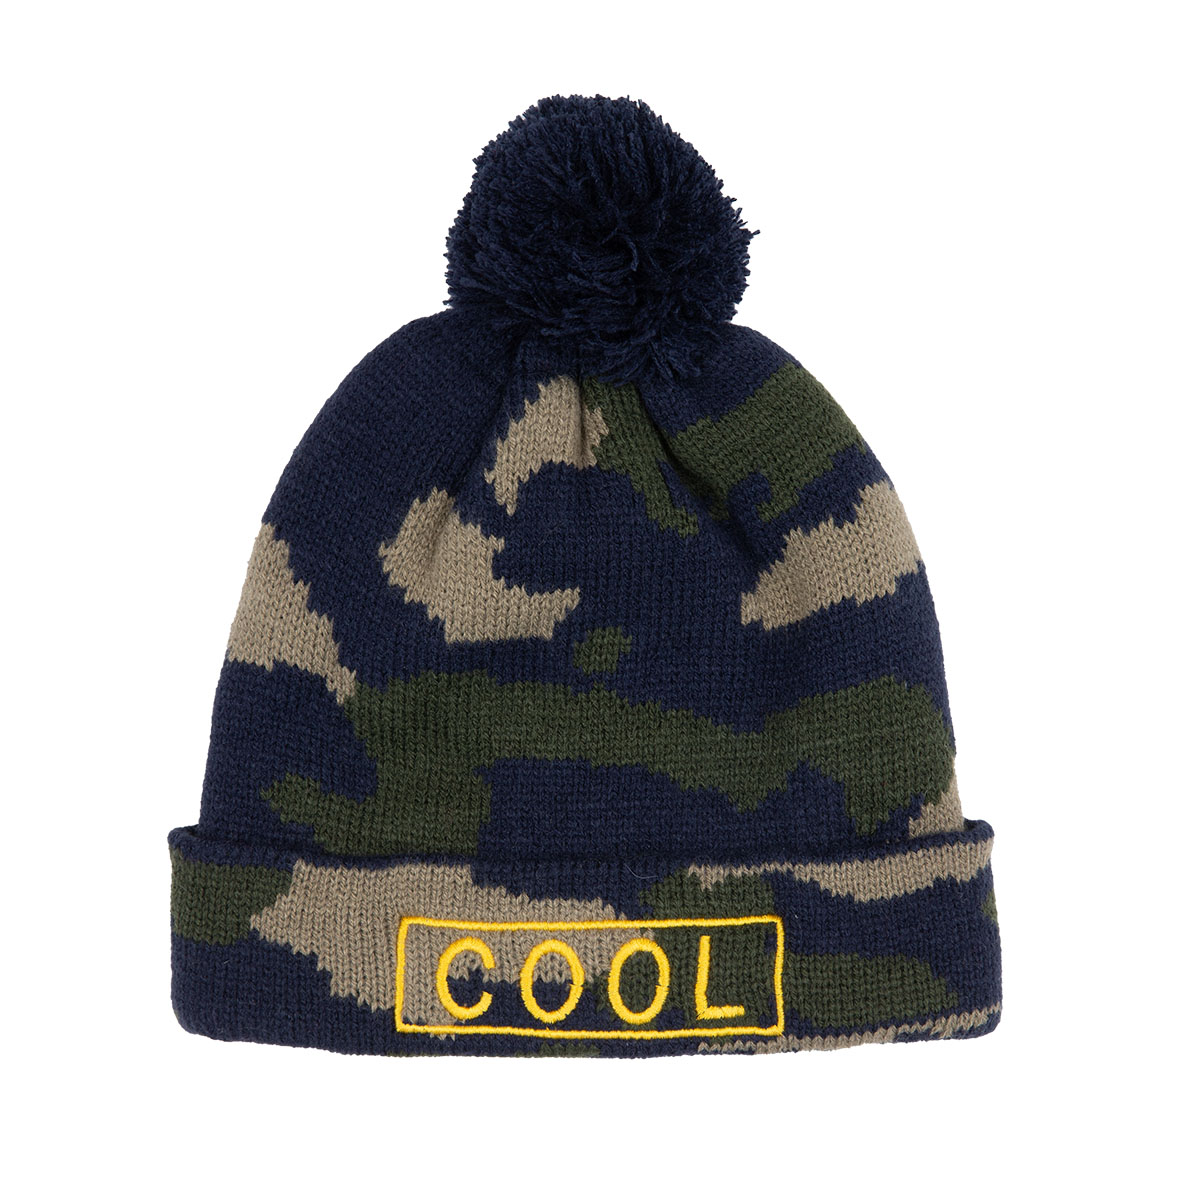 Mawi cappello kid boy camouflage - Mawi